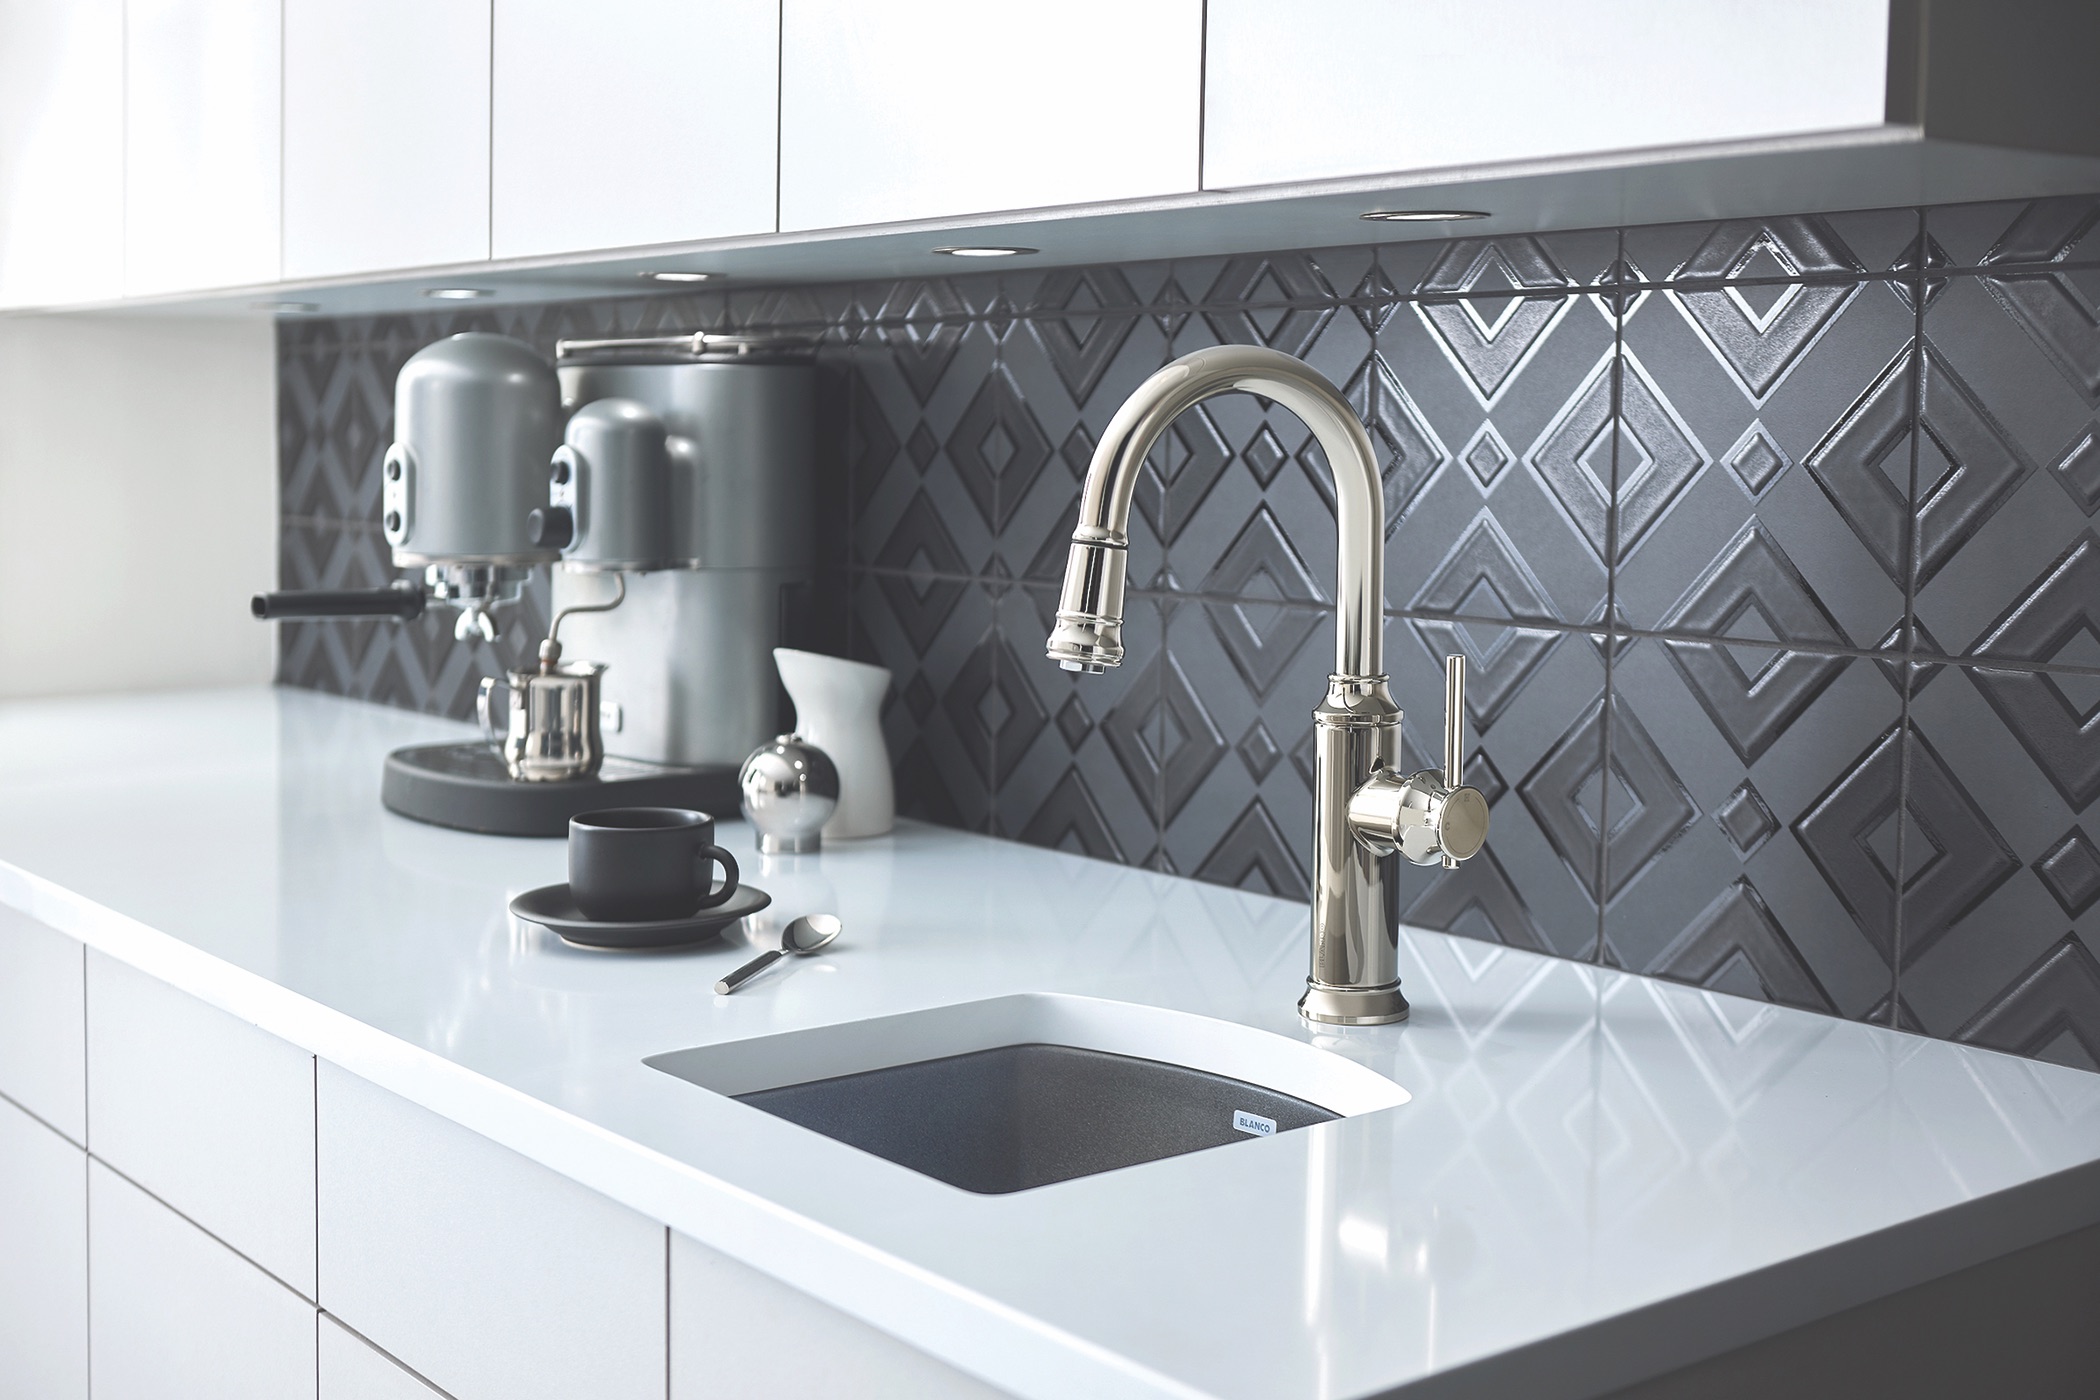 Empressa kitchen faucet collection, emphasizing silhouettes influenced by the form of vintage European wine presses